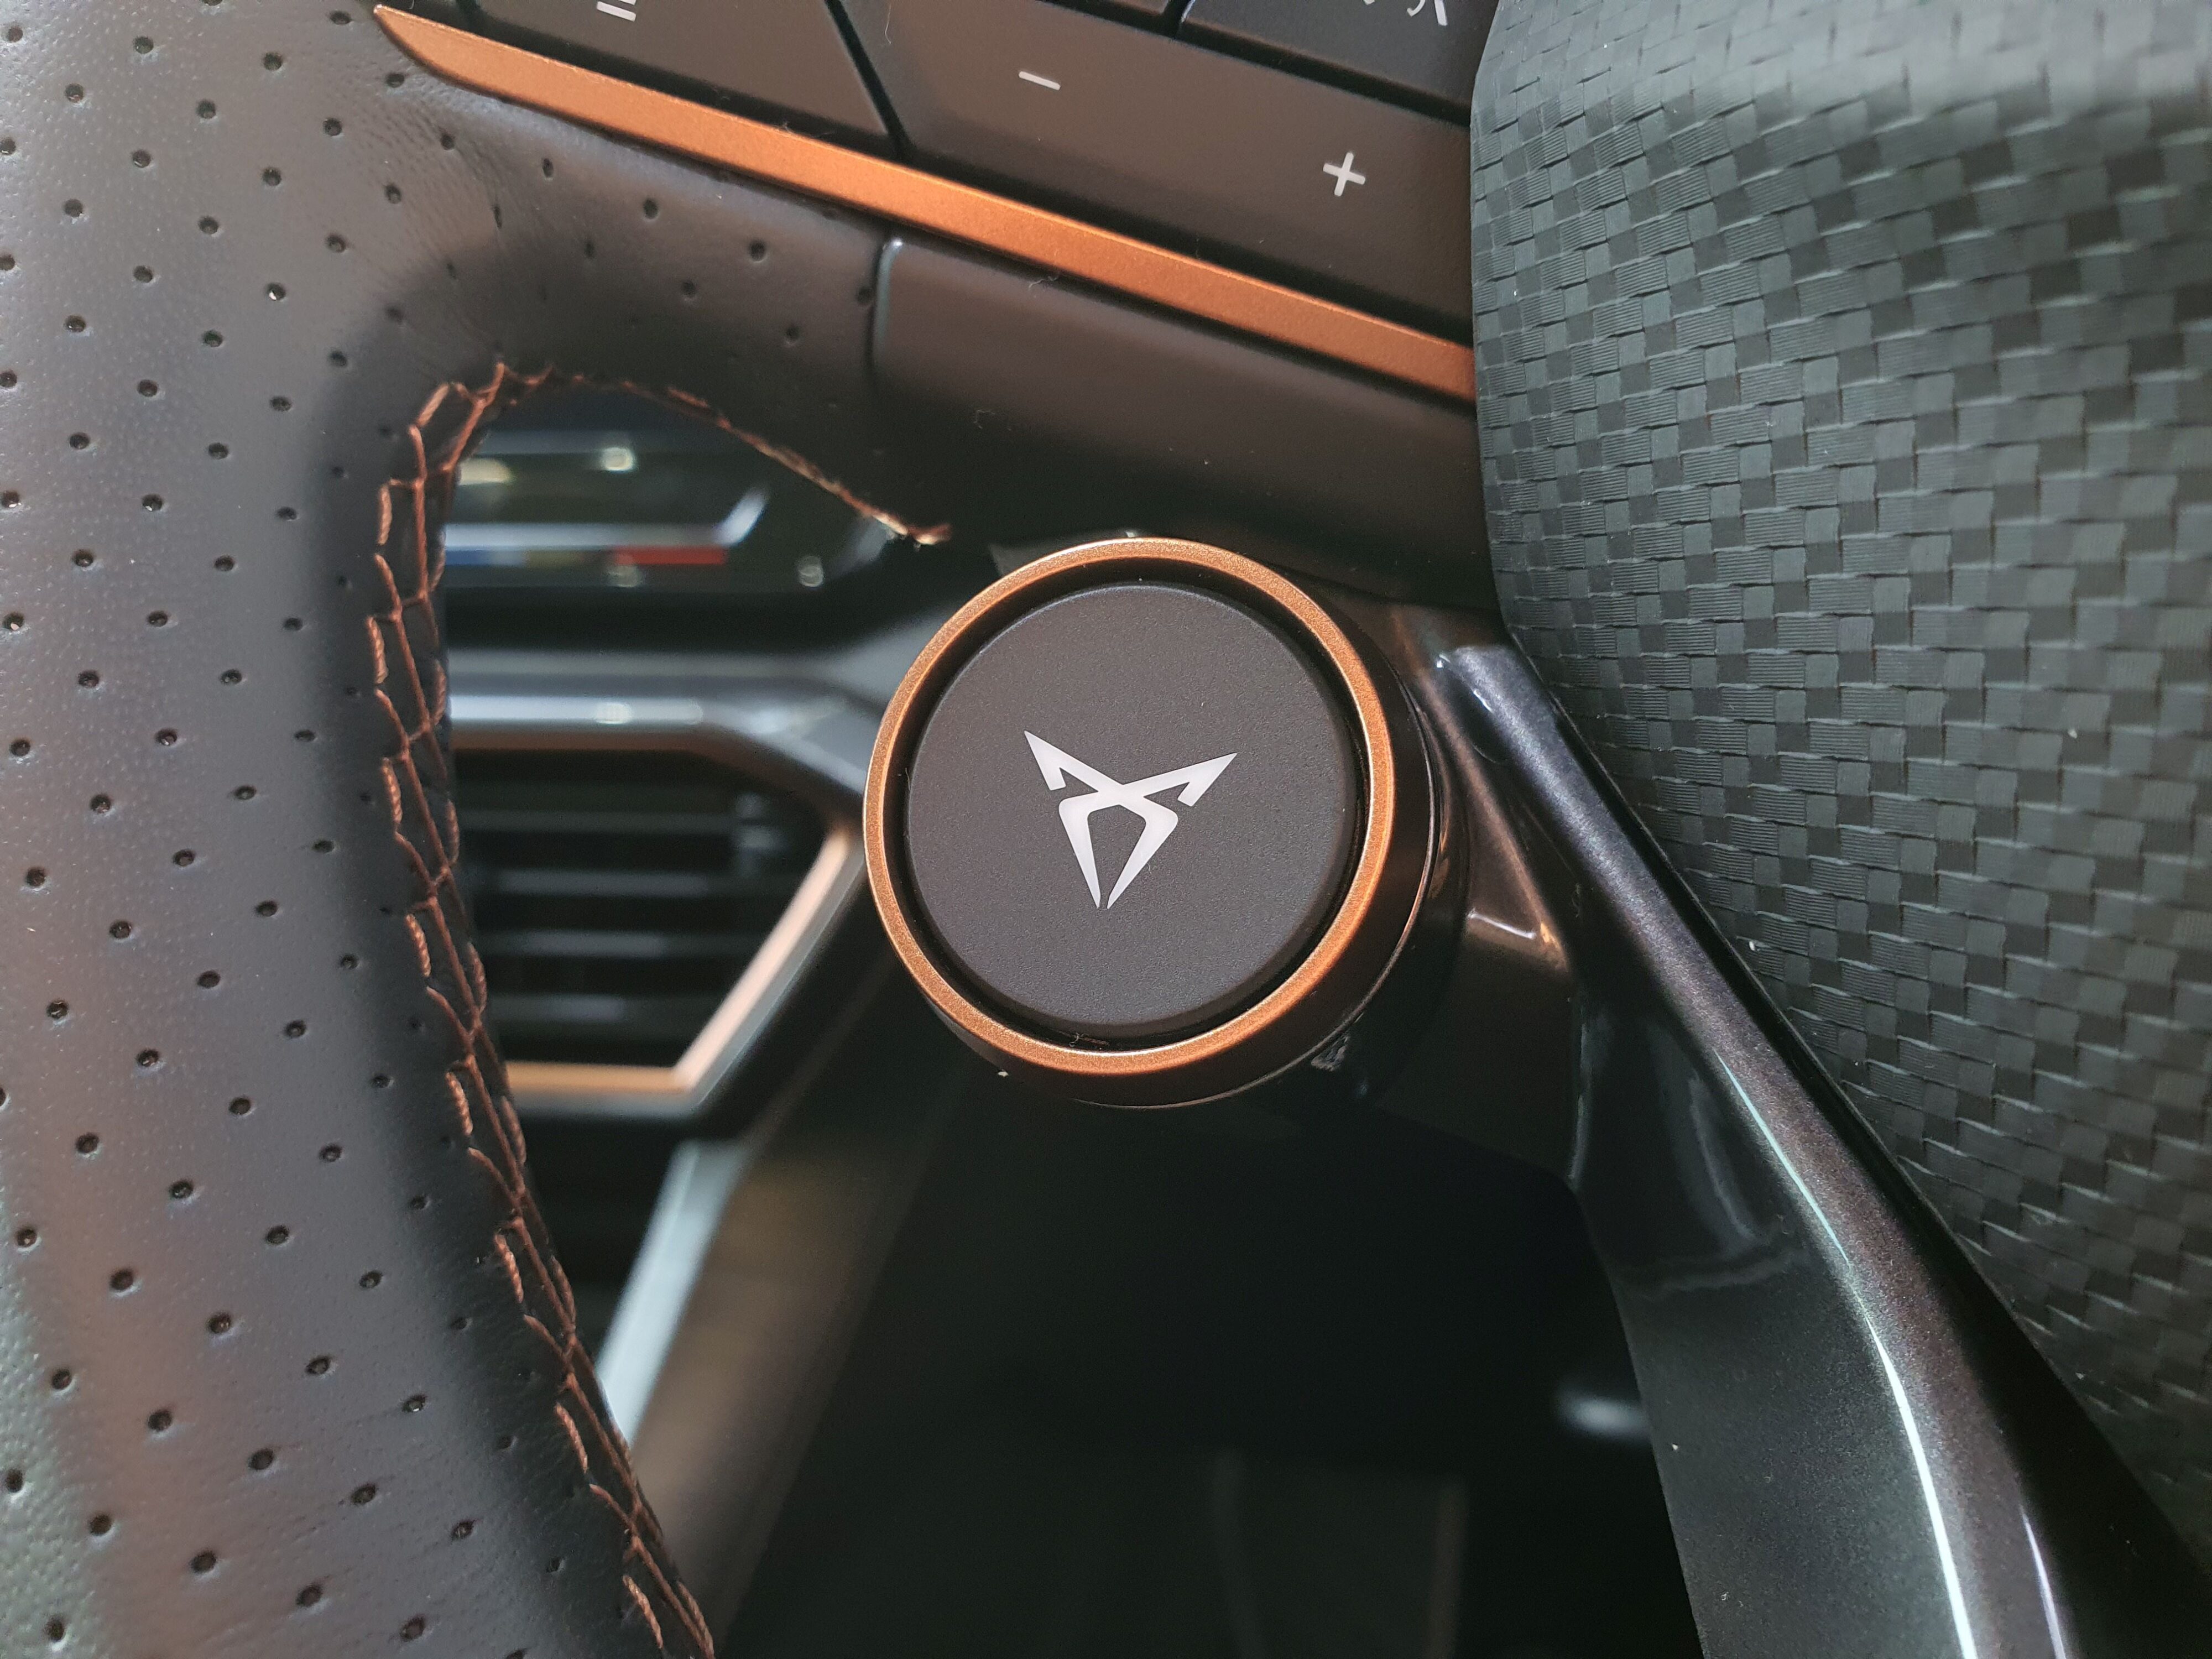 Cupra shortcut button on the steering wheel of the Cupra Formentor VZ Tribe Edition